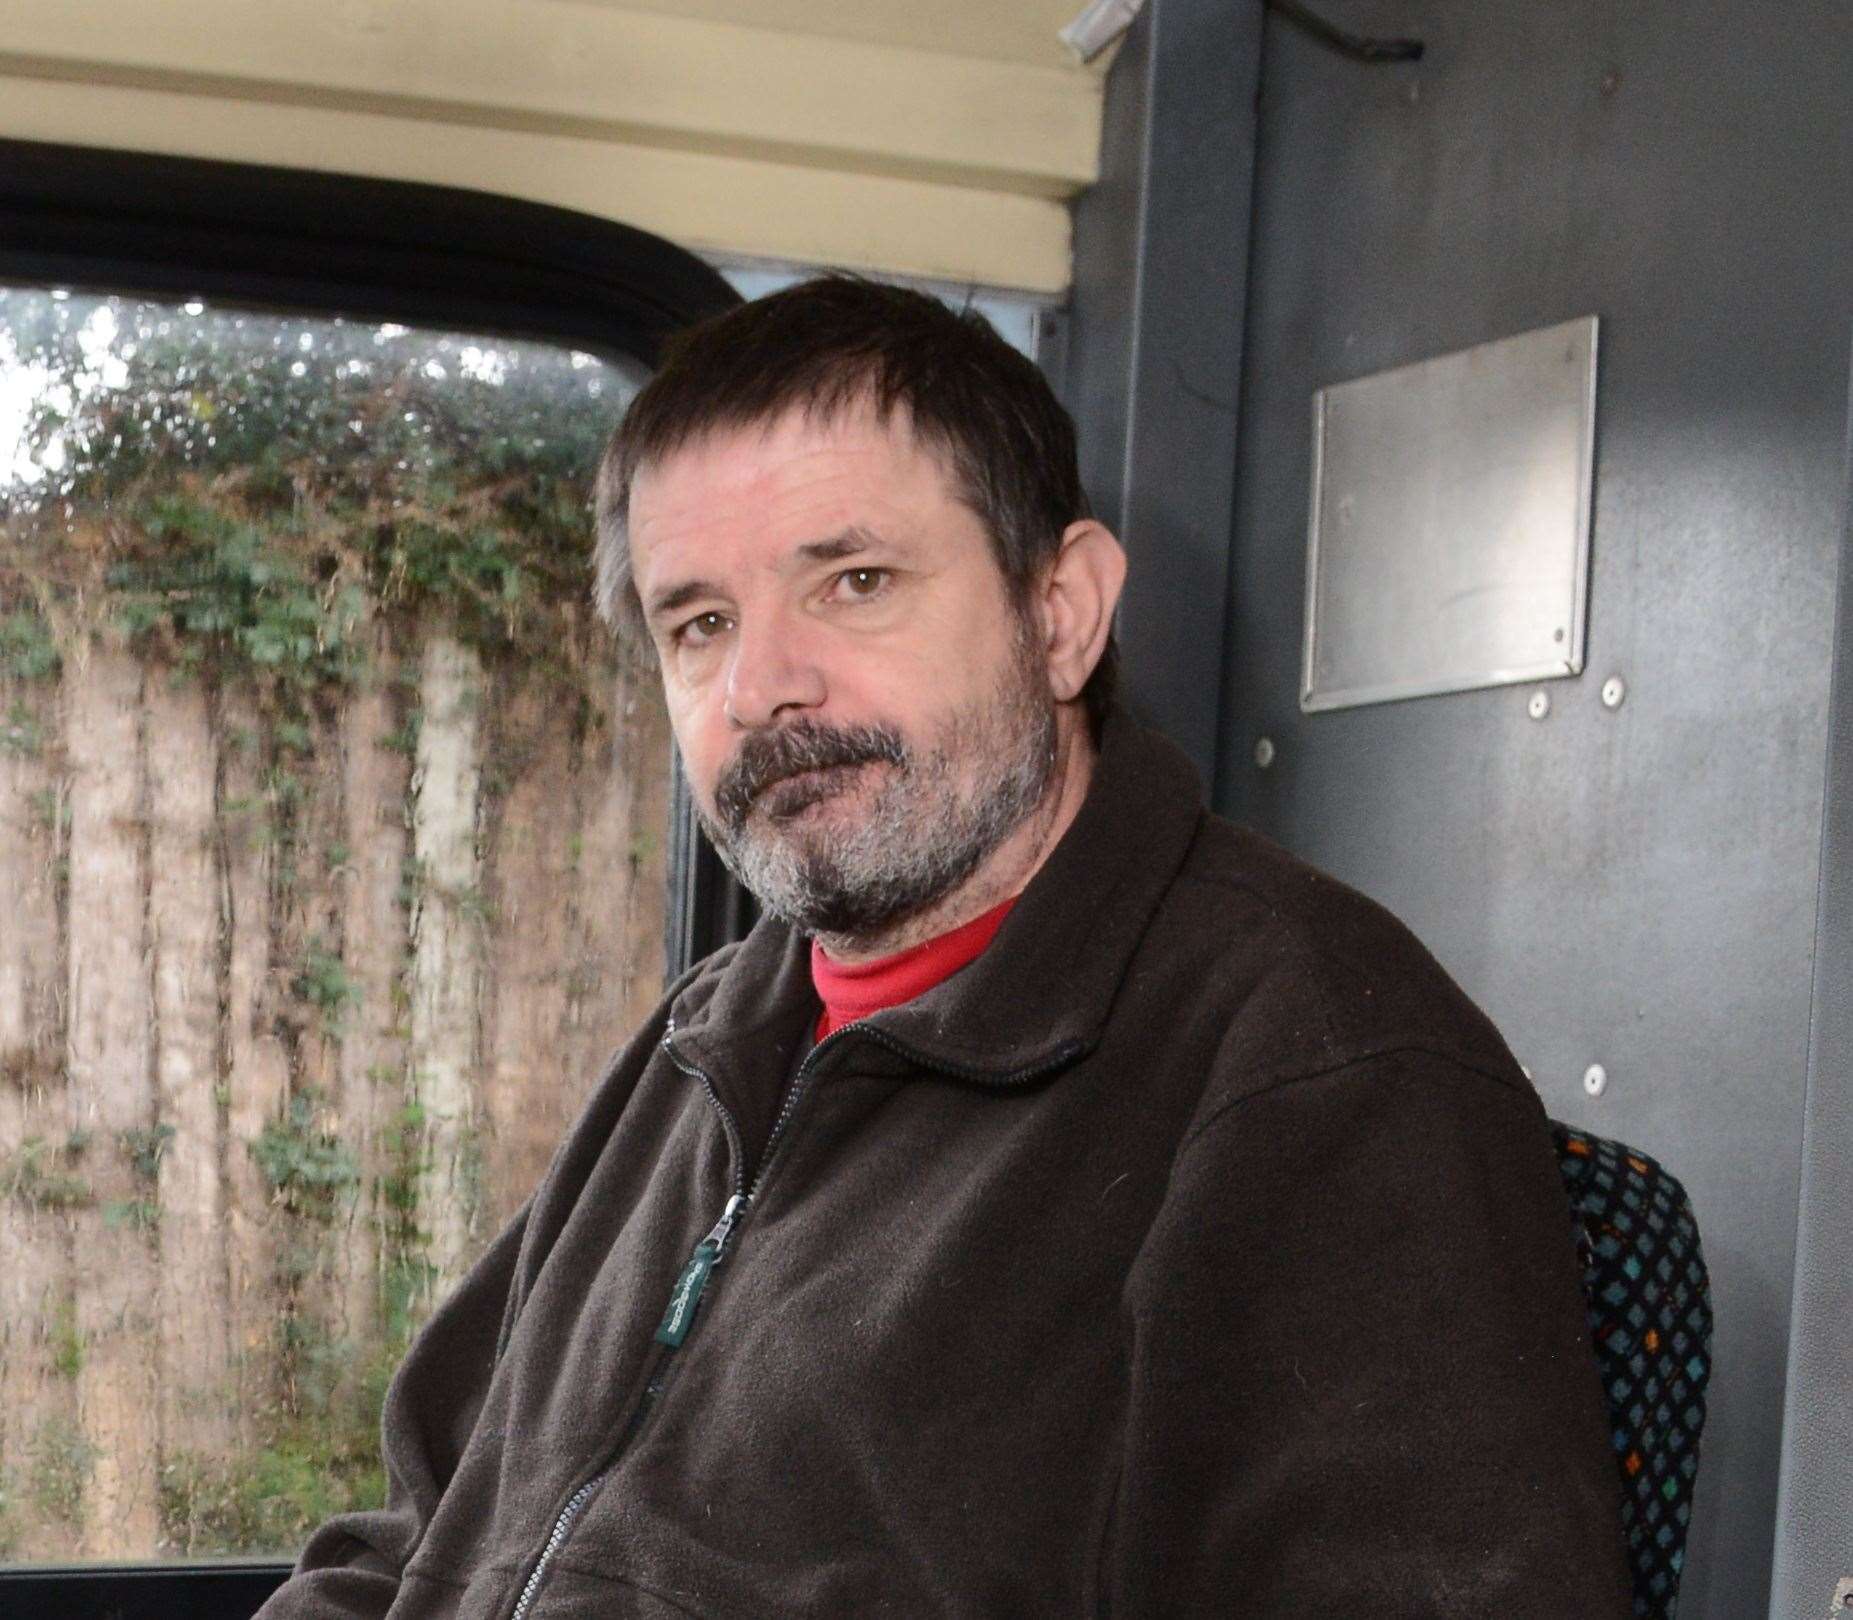 Tony Cooper who converted an old single-decker school bus in to a mobile homeless shelter